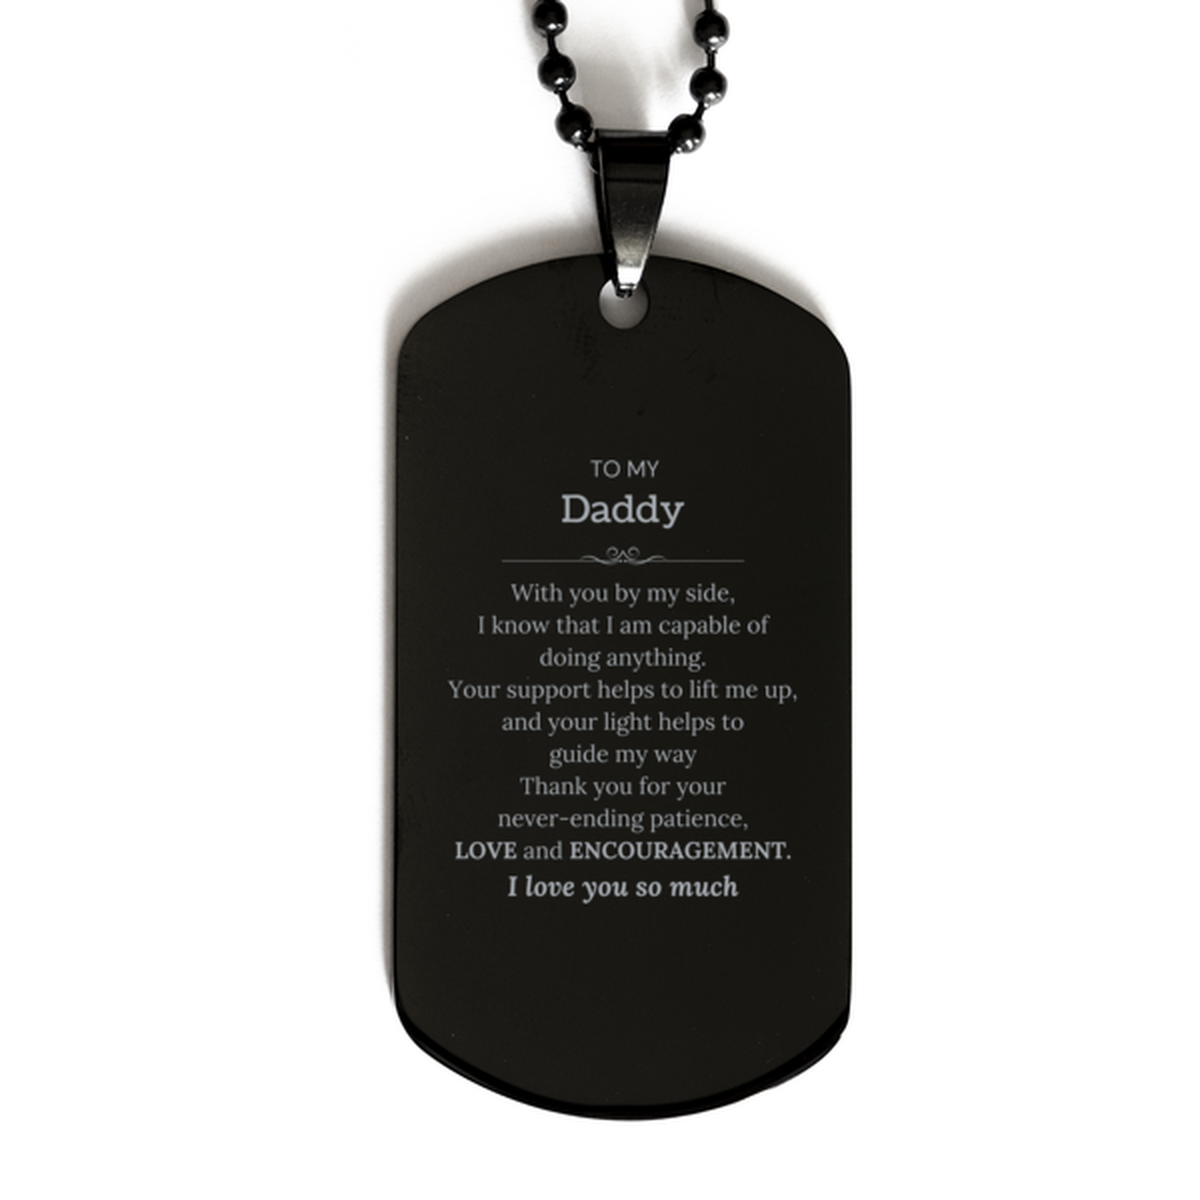 Appreciation Daddy Black Dog Tag Gifts, To My Daddy Birthday Christmas Wedding Keepsake Gifts for Daddy With you by my side, I know that I am capable of doing anything. I love you so much